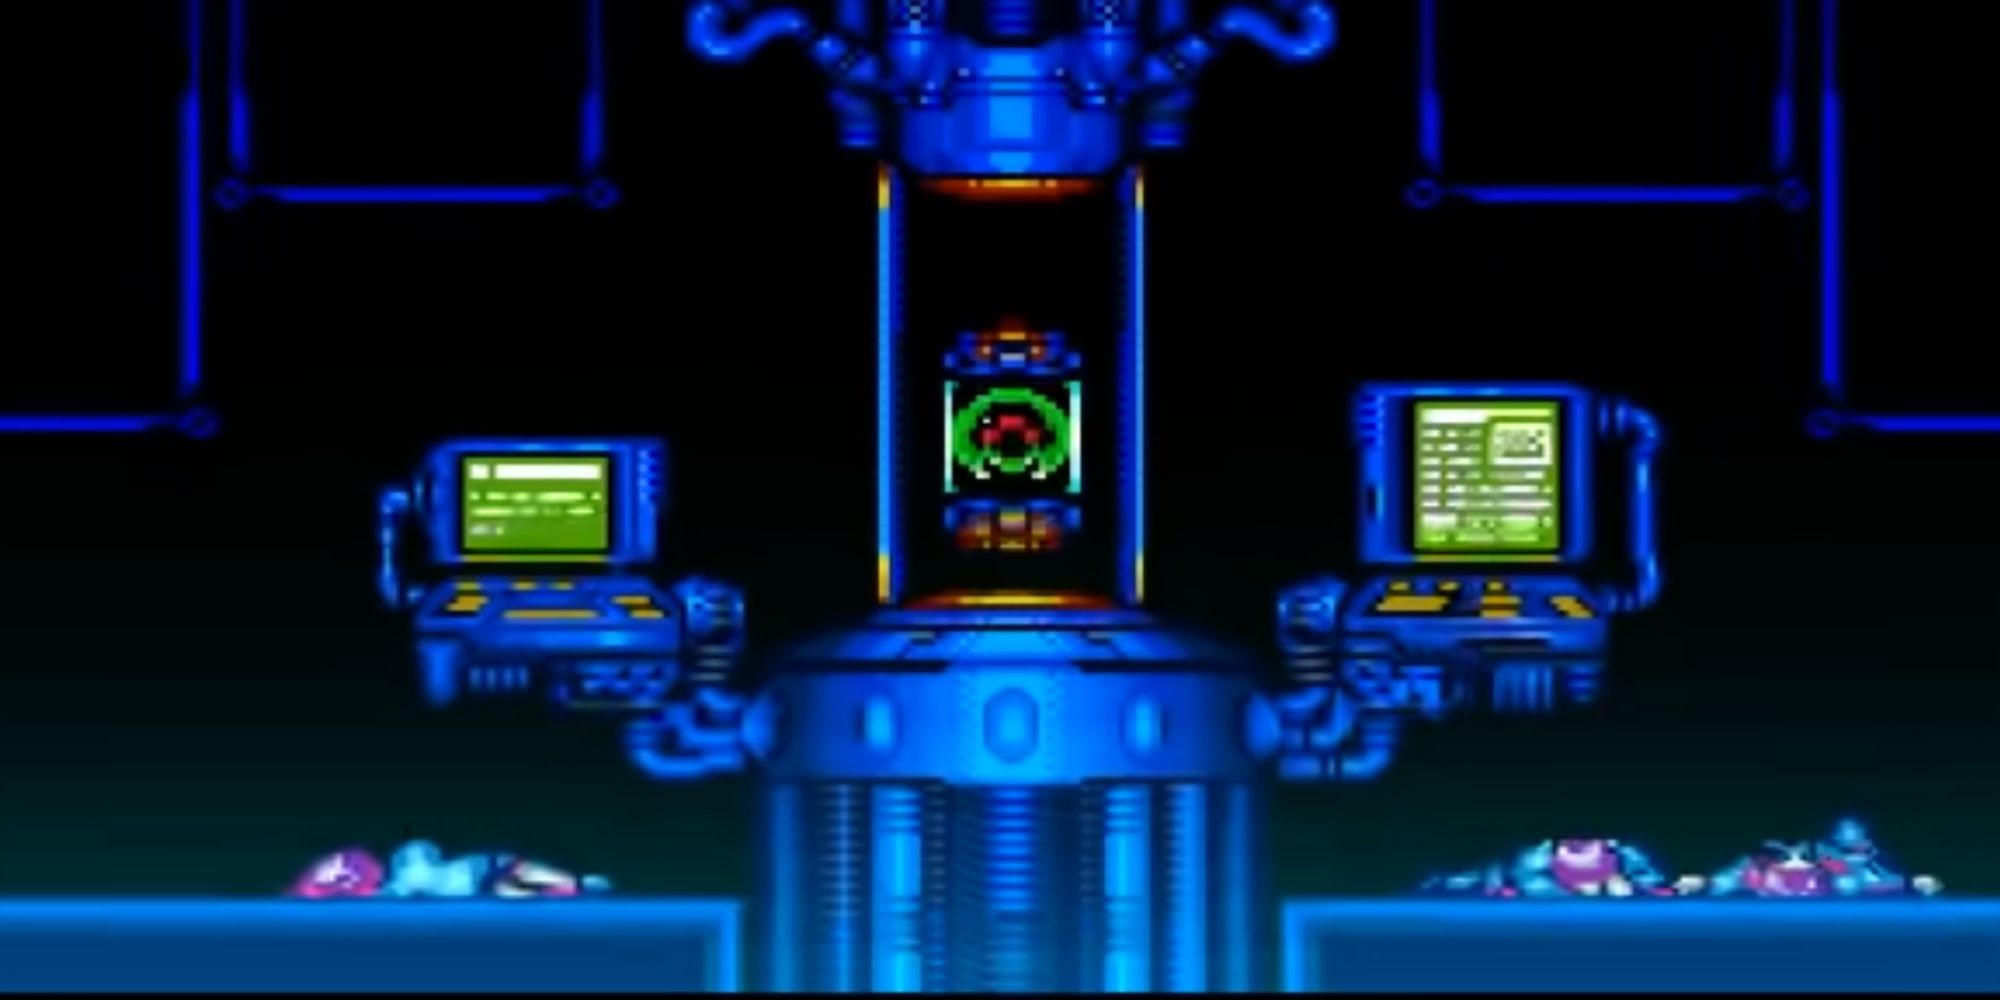 A screenshot of Ceres Station in Super Metroid, showing the baby Metroid in a test tube surrounded by dead bodies